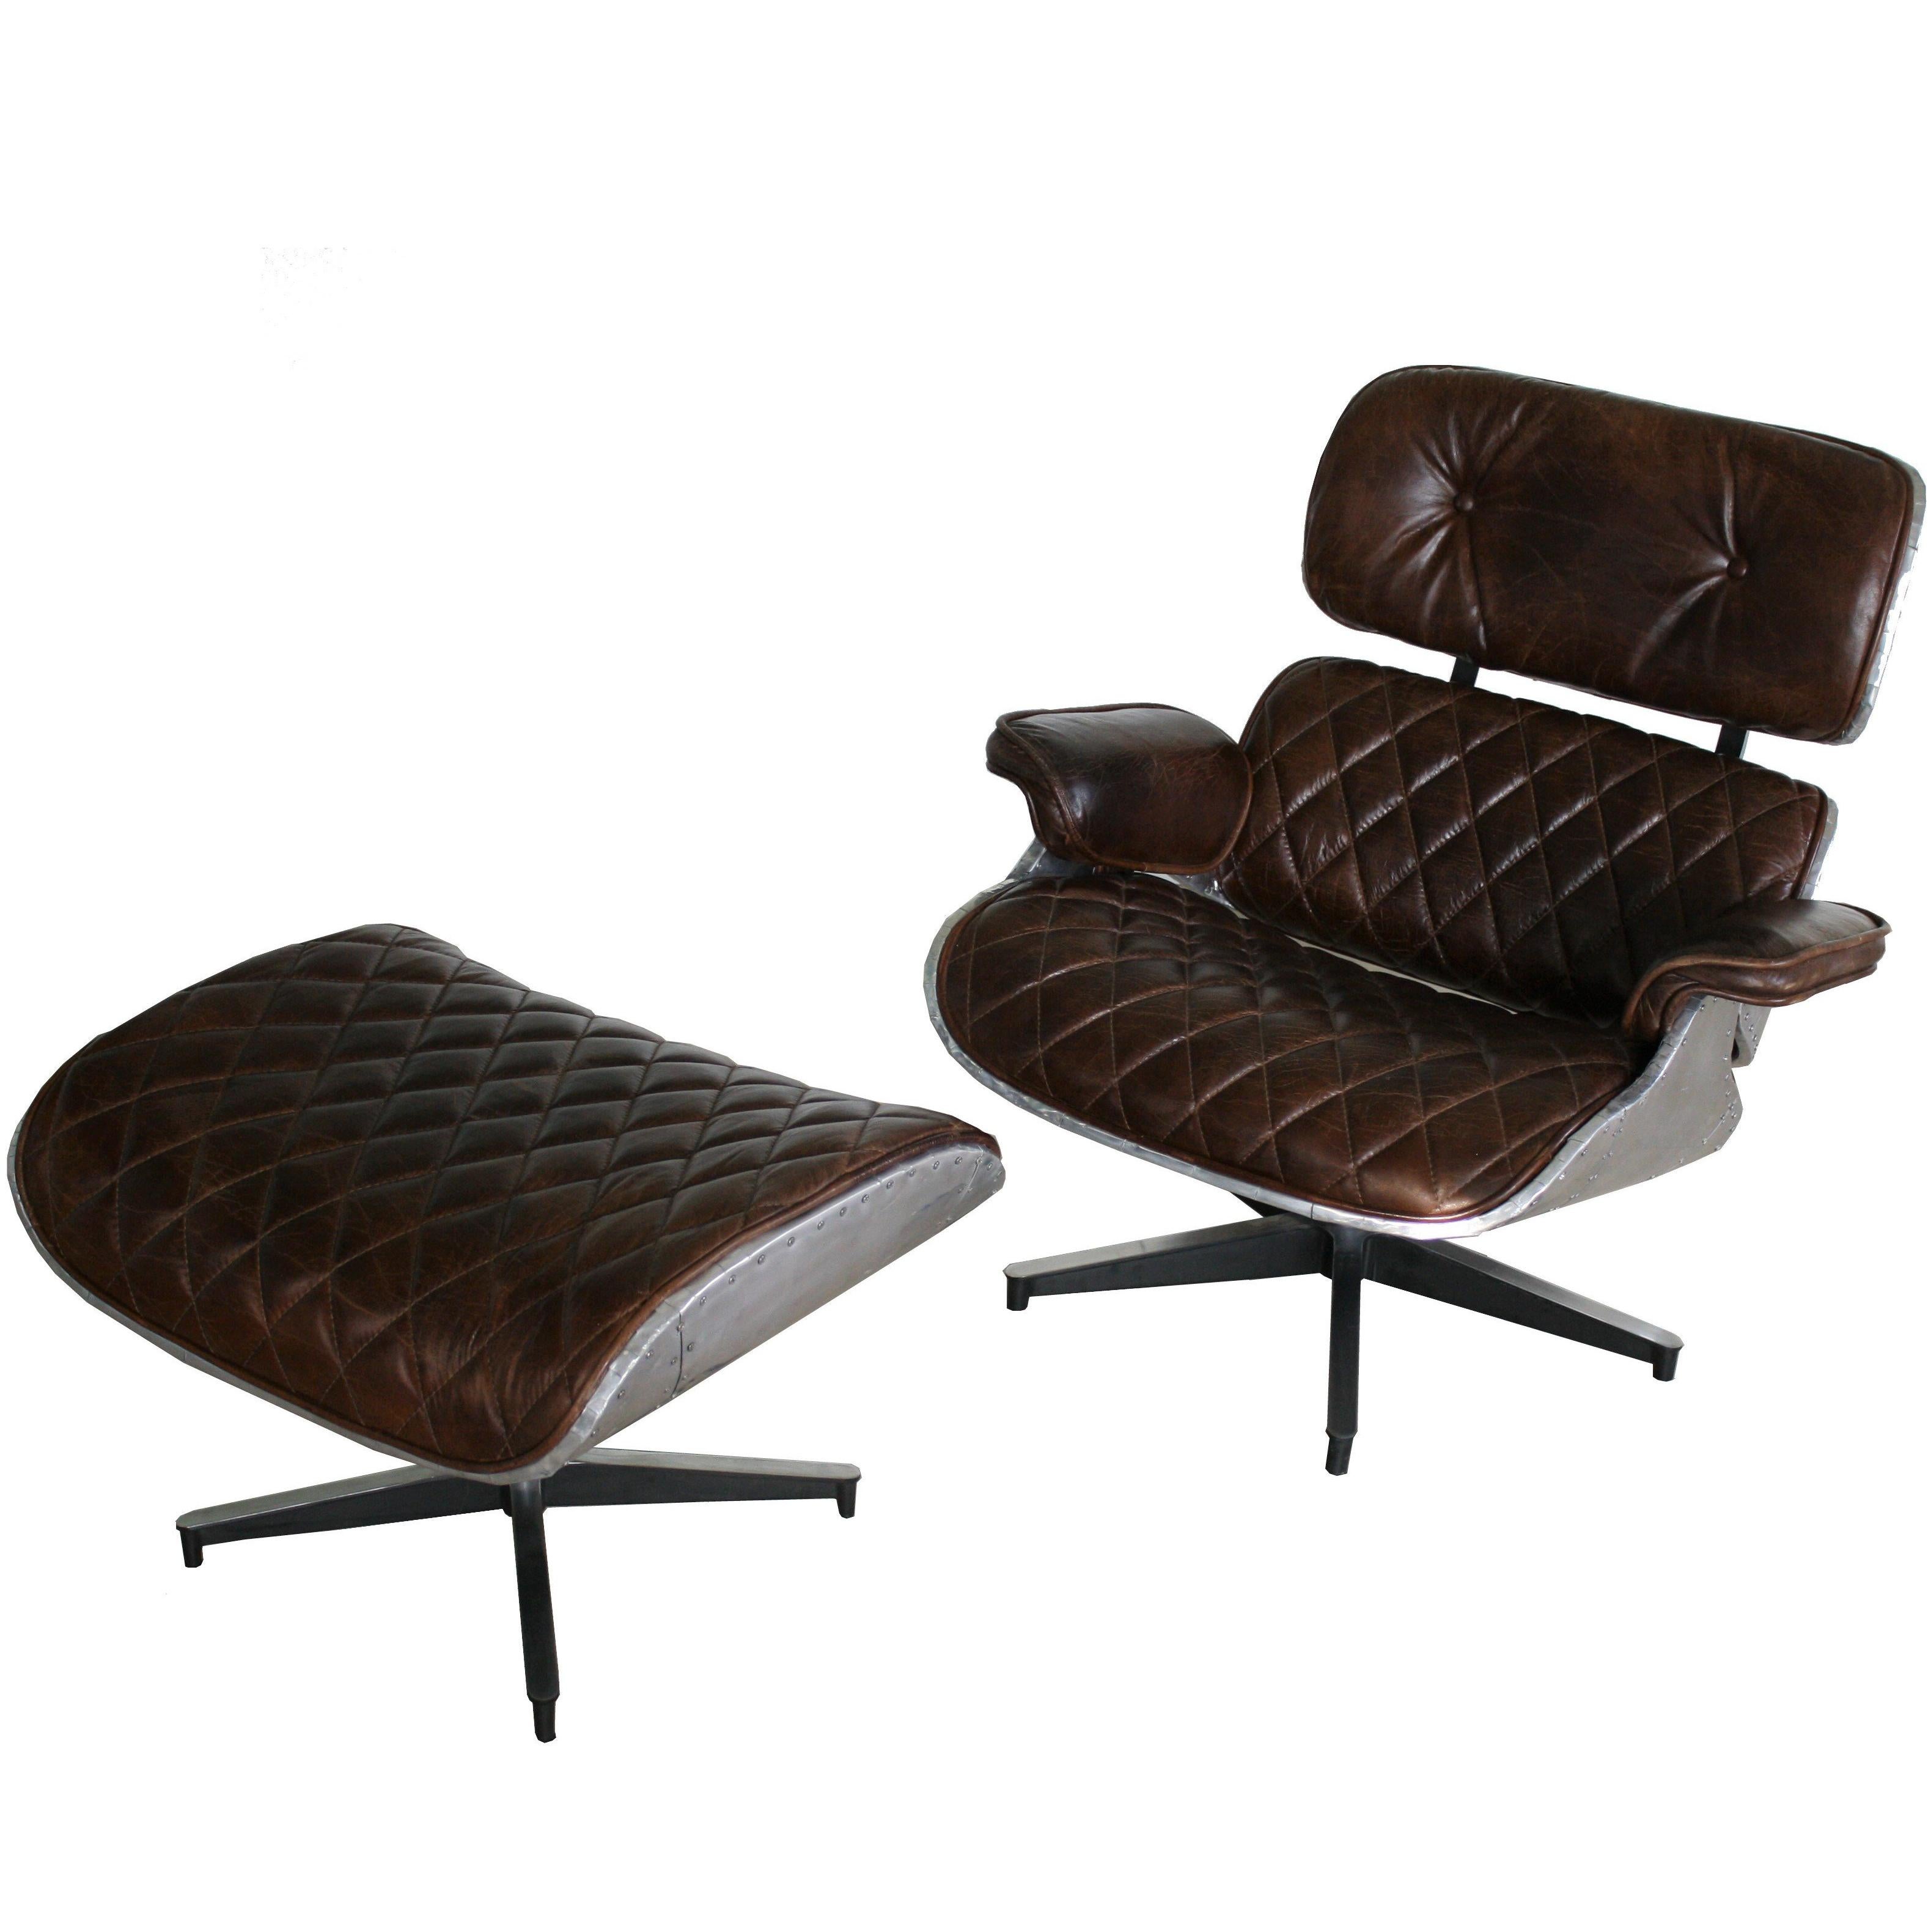 Unique Eames Lounge Chair and Ottoman Aviator Style